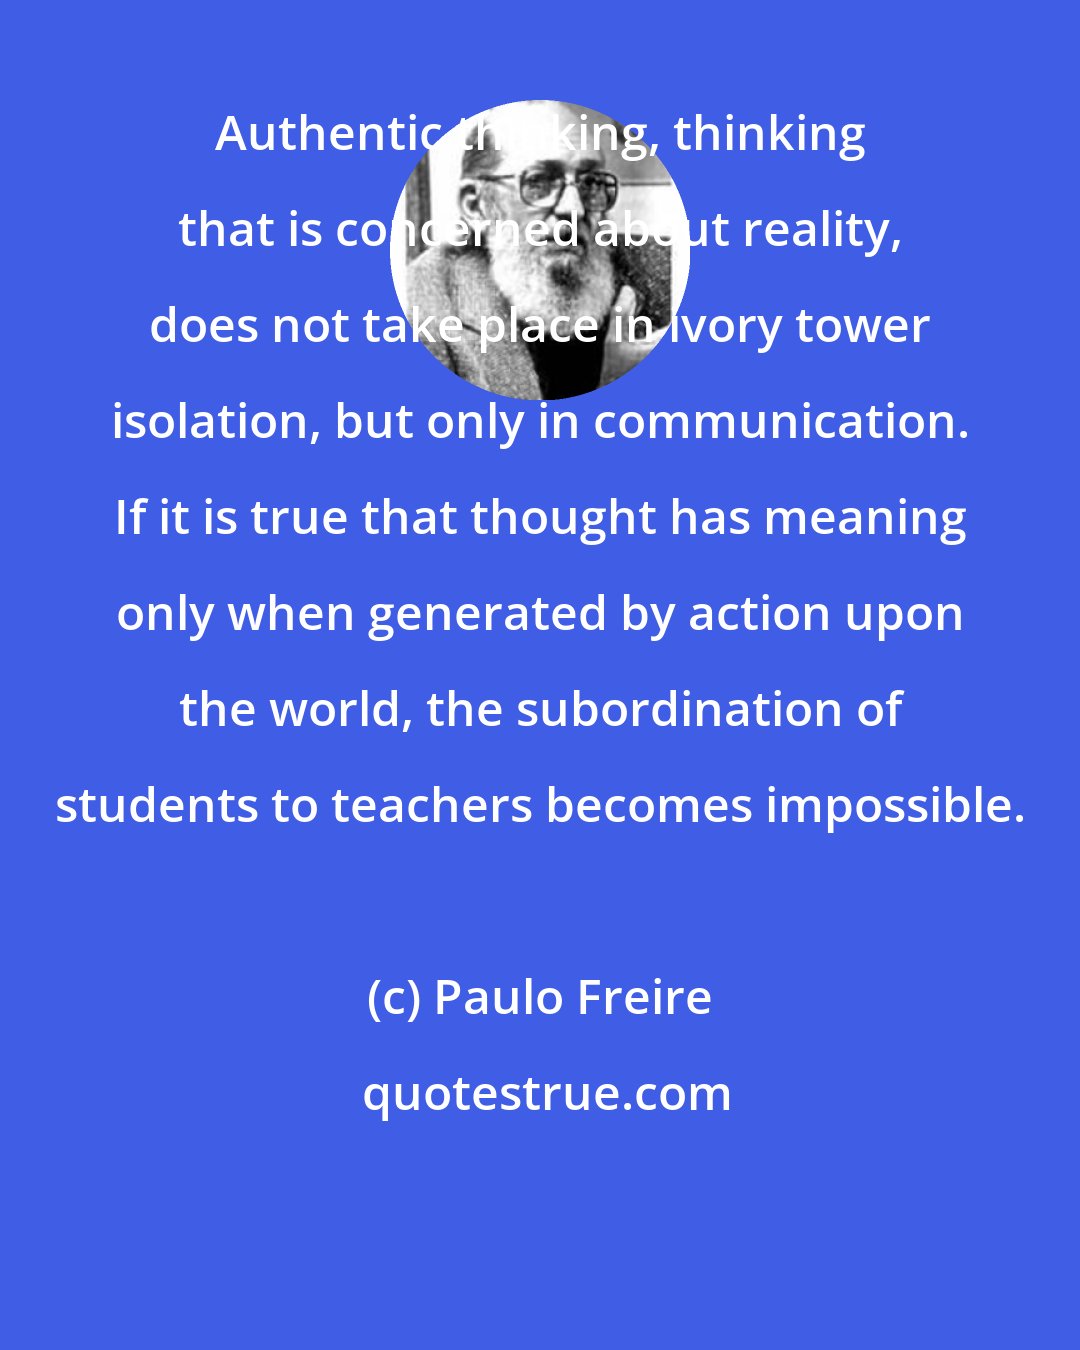 Paulo Freire: Authentic thinking, thinking that is concerned about reality, does not take place in ivory tower isolation, but only in communication. If it is true that thought has meaning only when generated by action upon the world, the subordination of students to teachers becomes impossible.